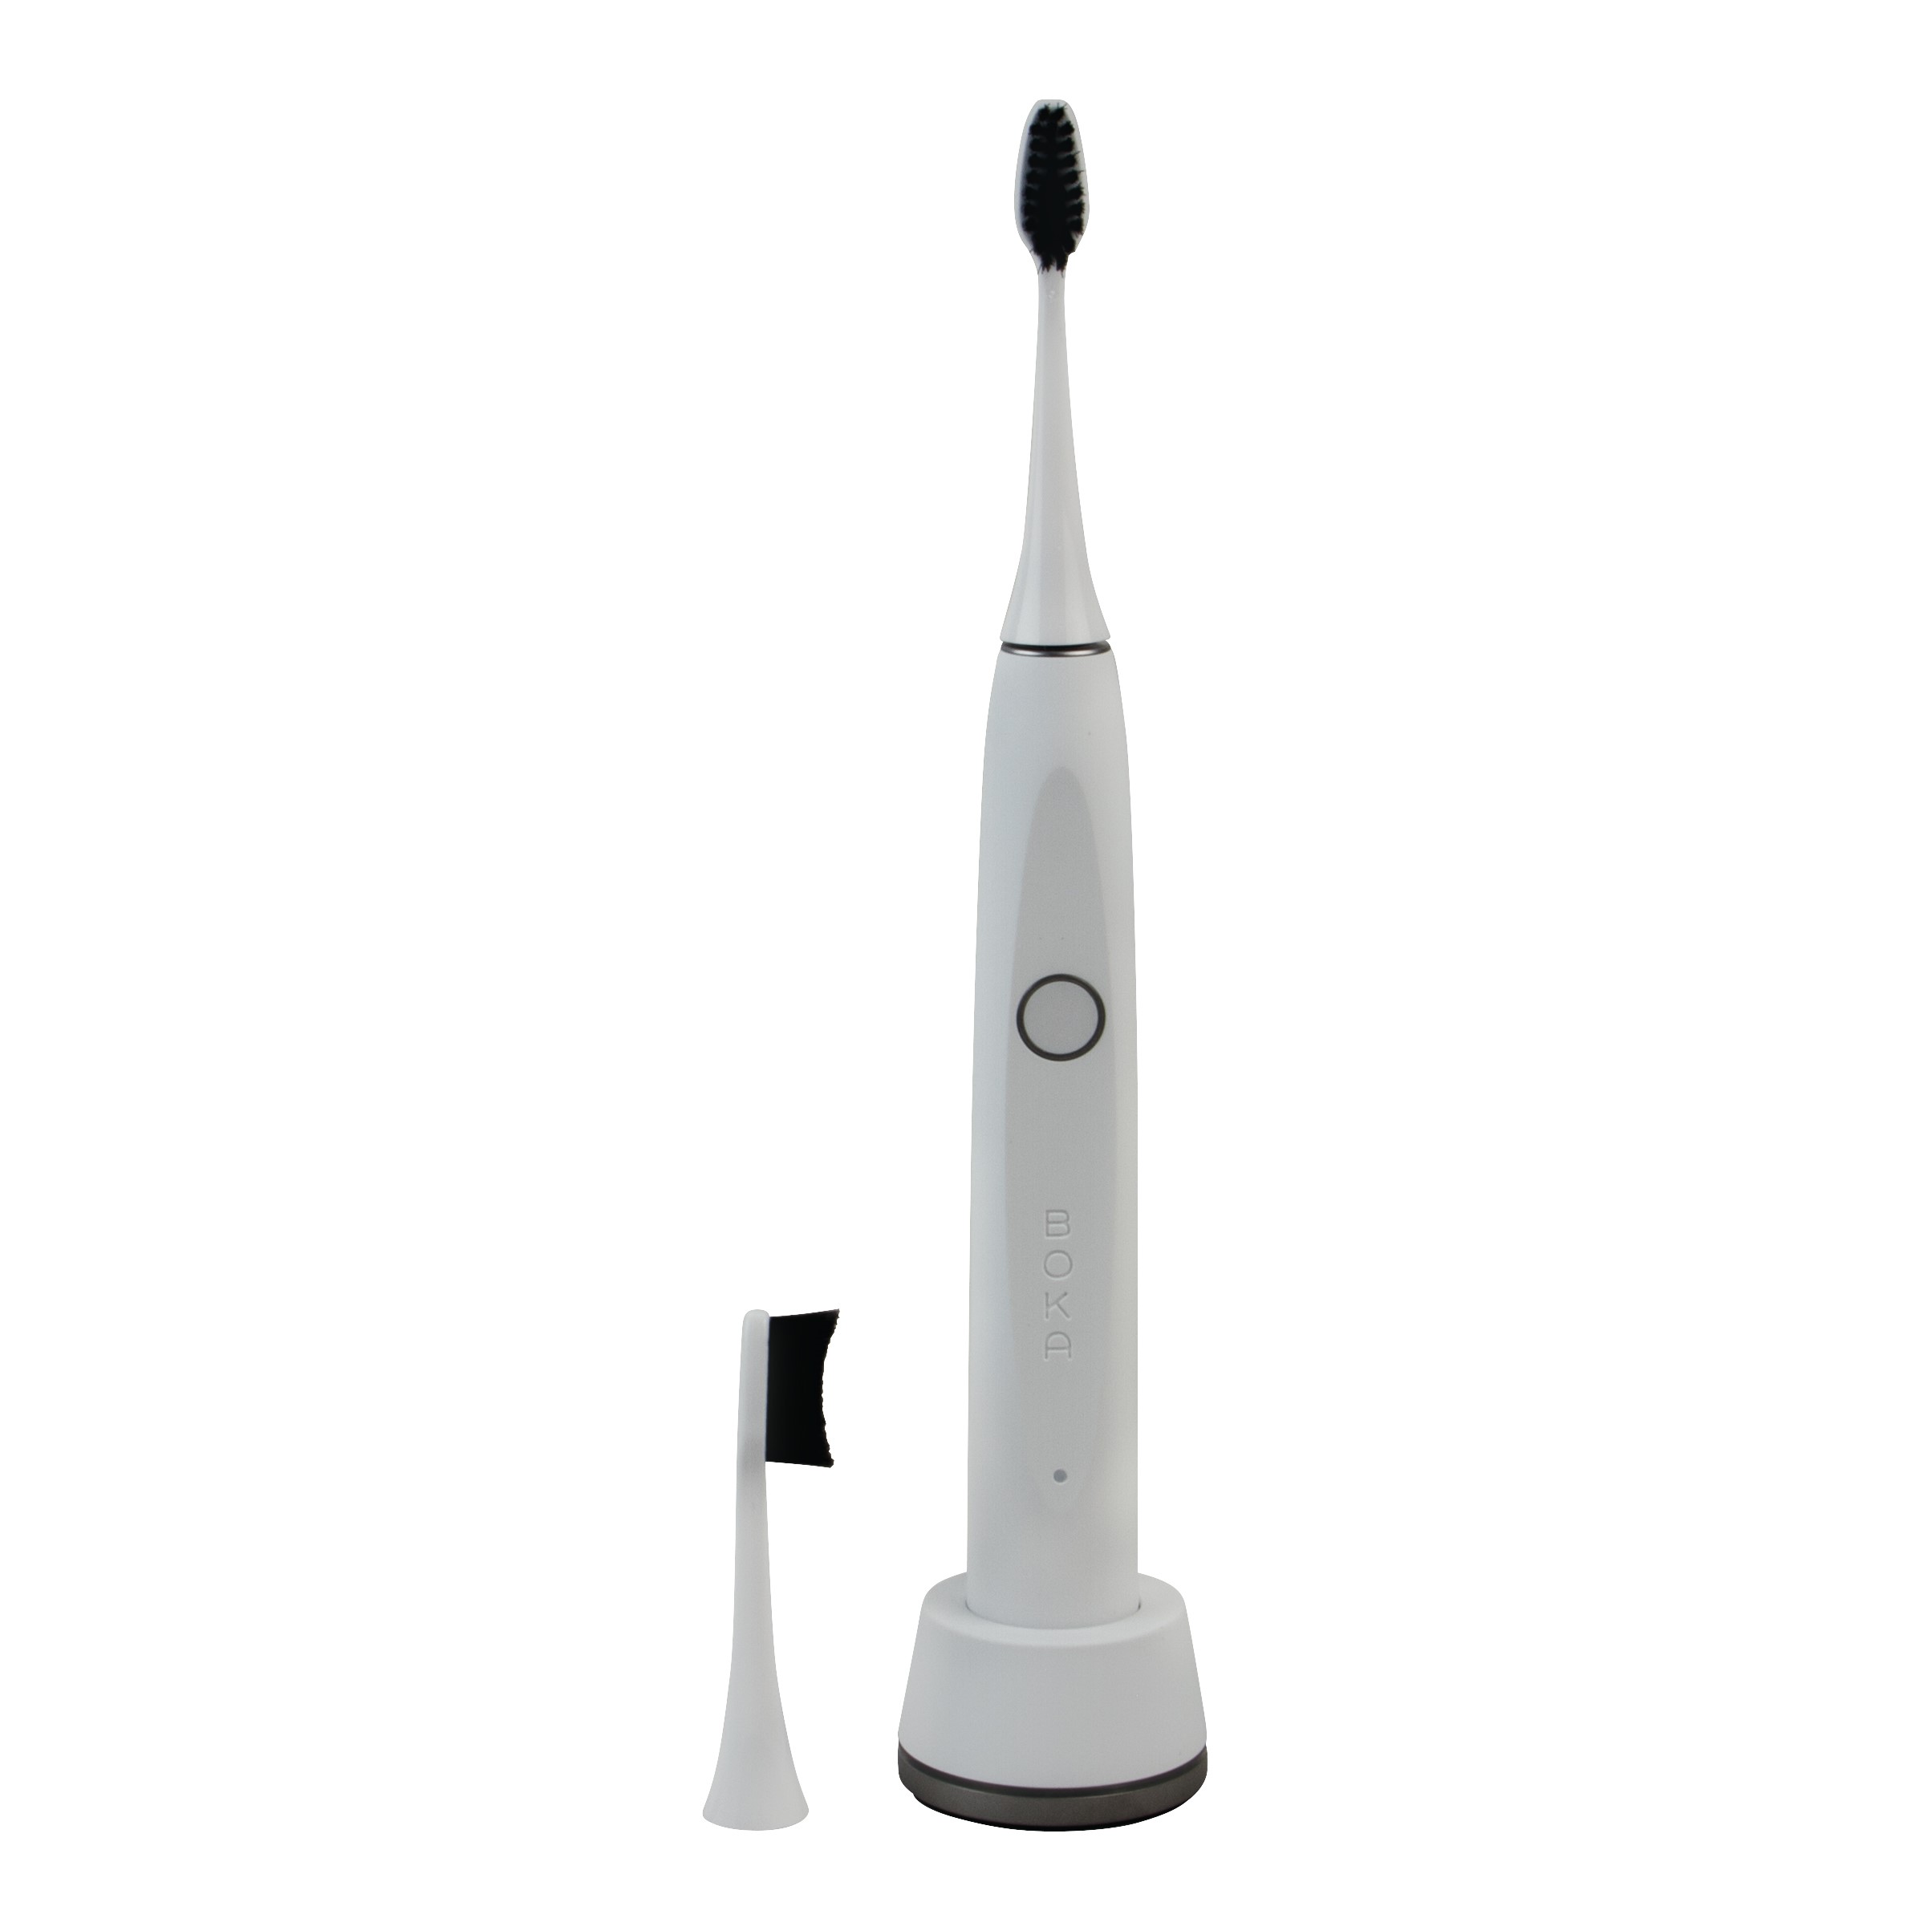 Boka electric toothbrush with two activated charcoal bristle replacement heads, white - image 2 of 5